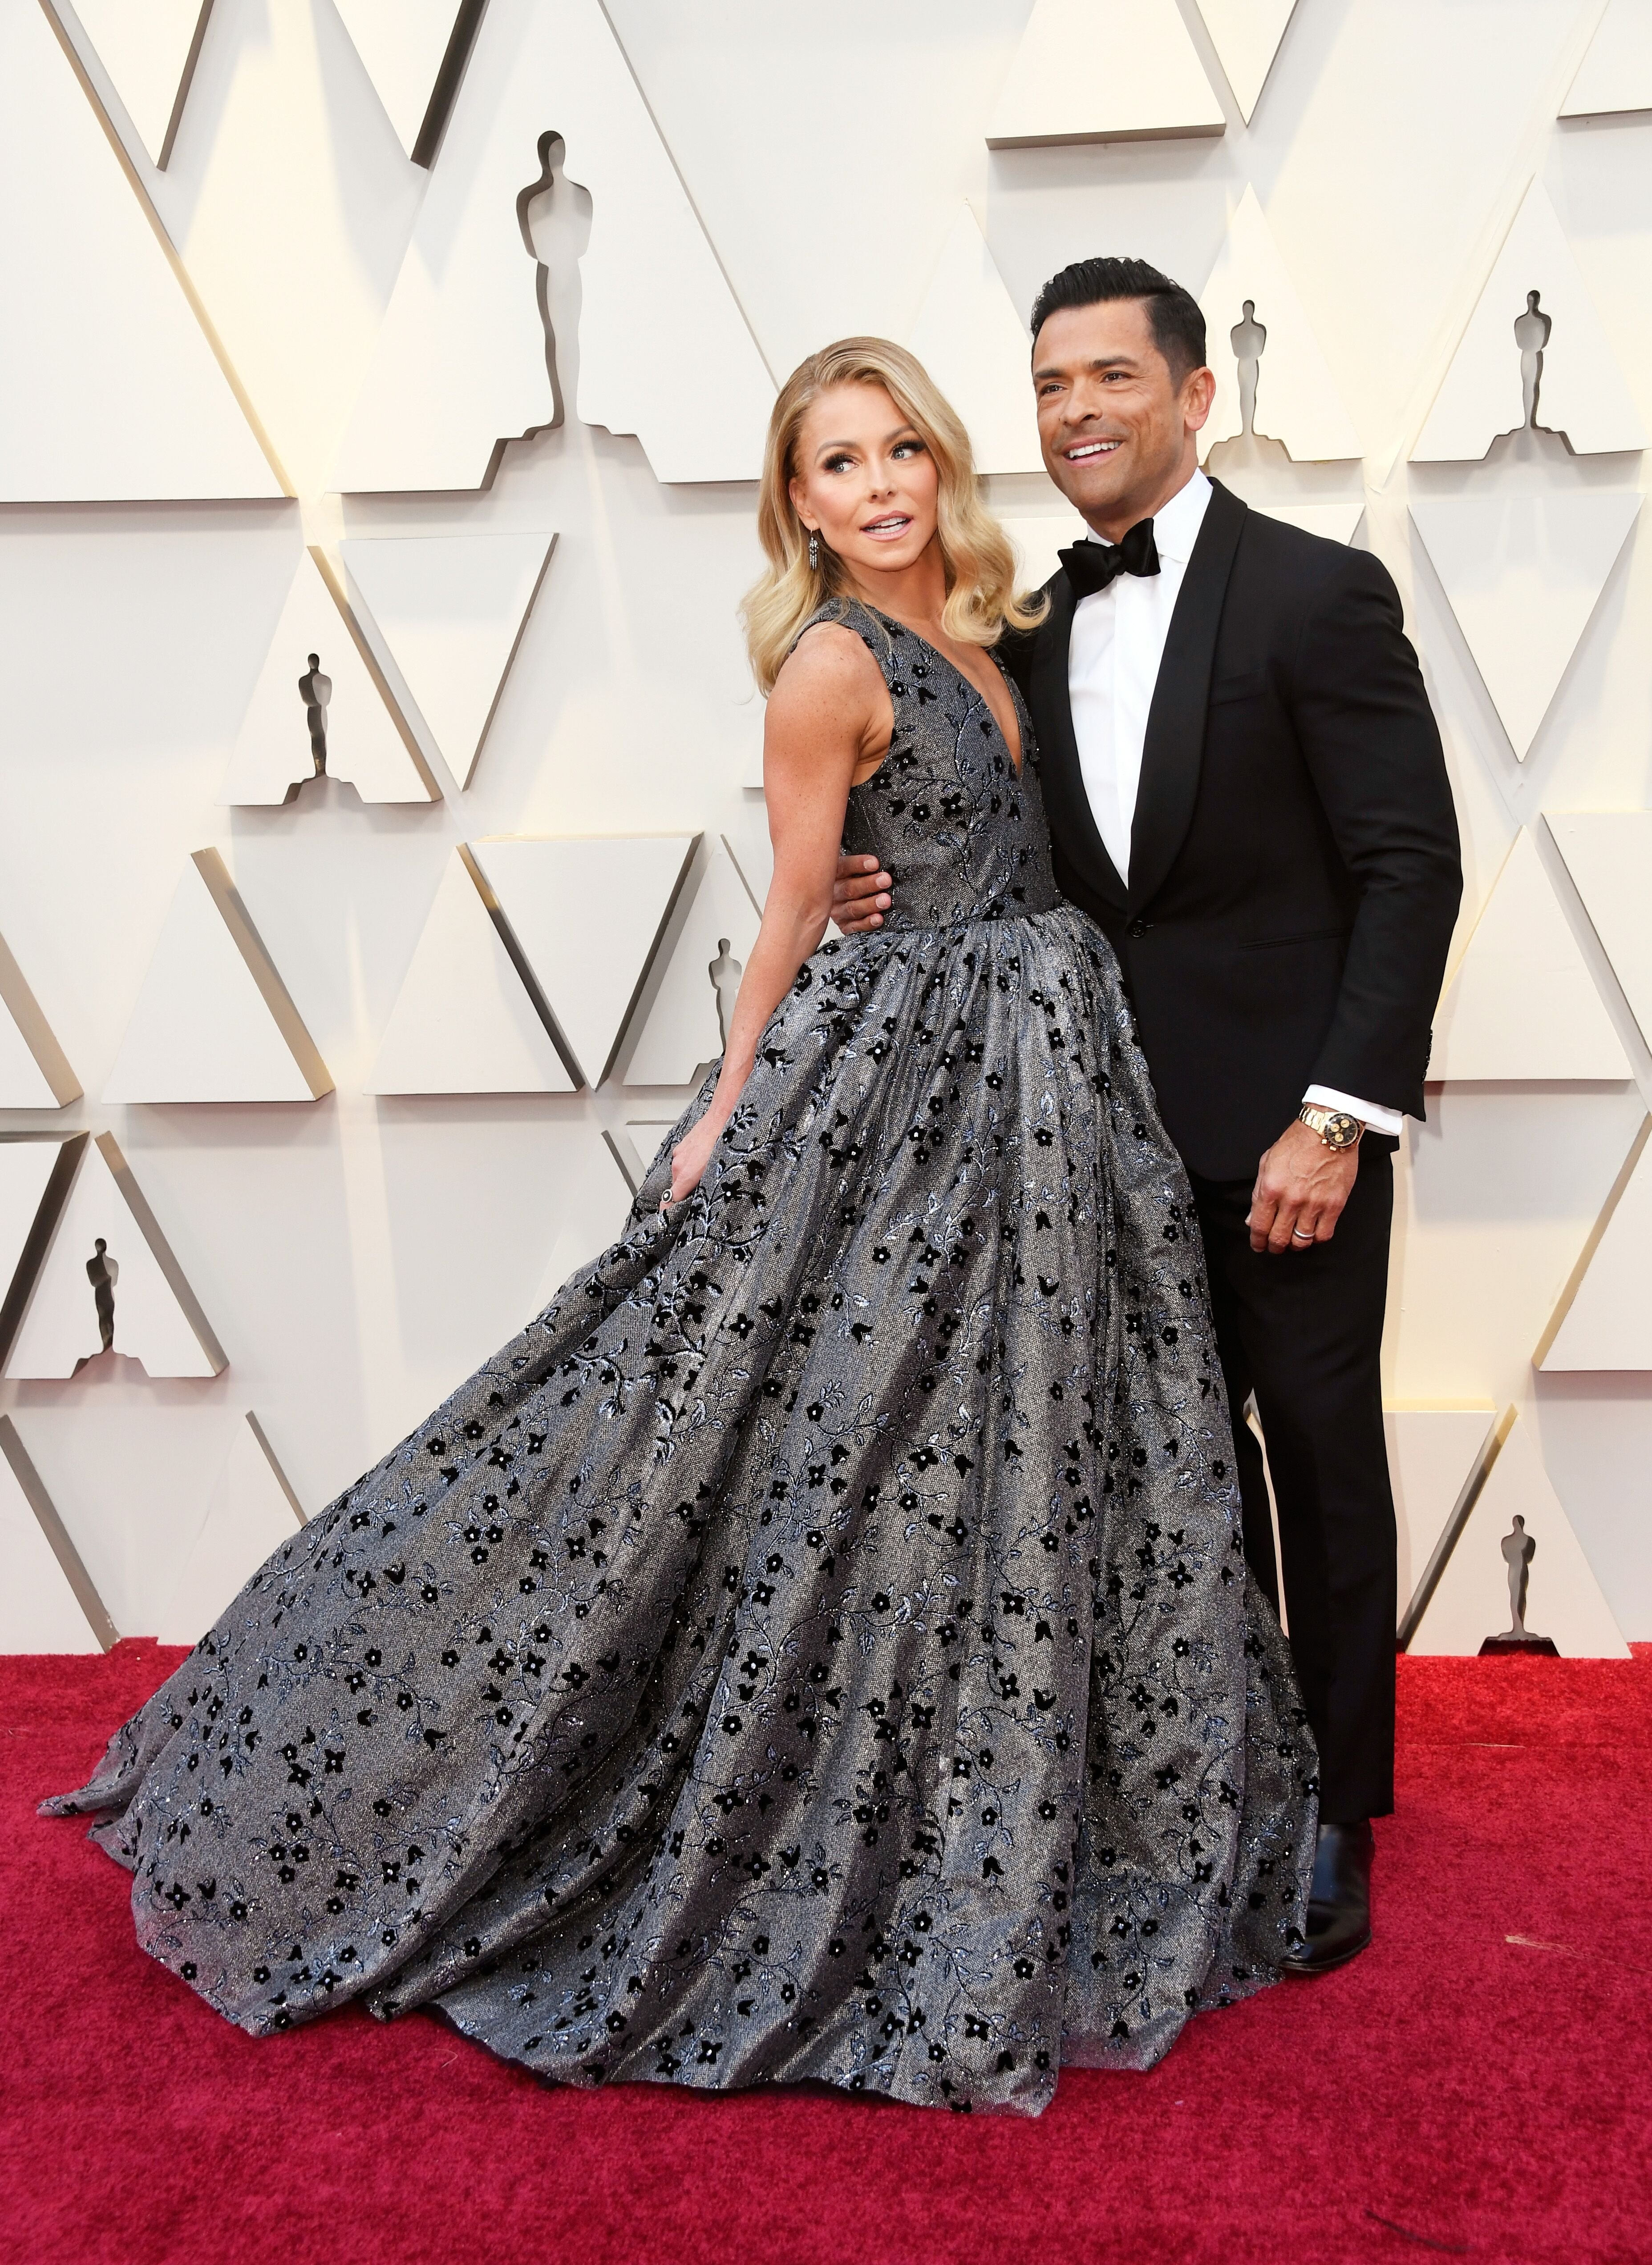 Kelly Ripa and husband Mark Consuelos at the 2019 Oscars | Source: Getty Images